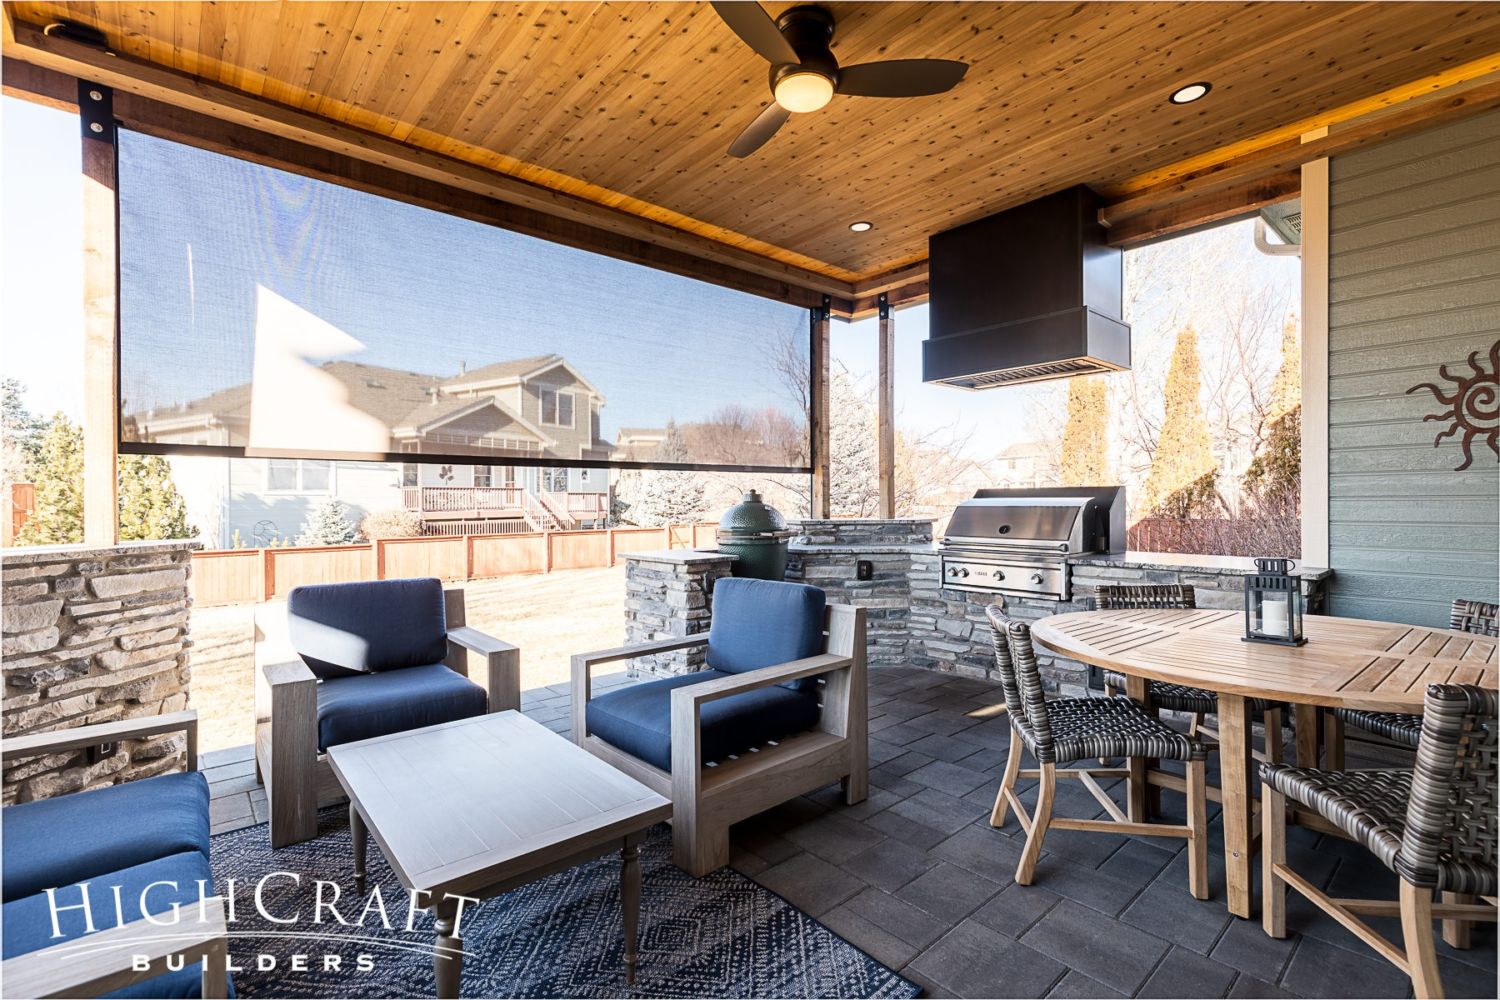 construction-remodeling-companies-covered-patio-outdoor-living-area-sun-shade